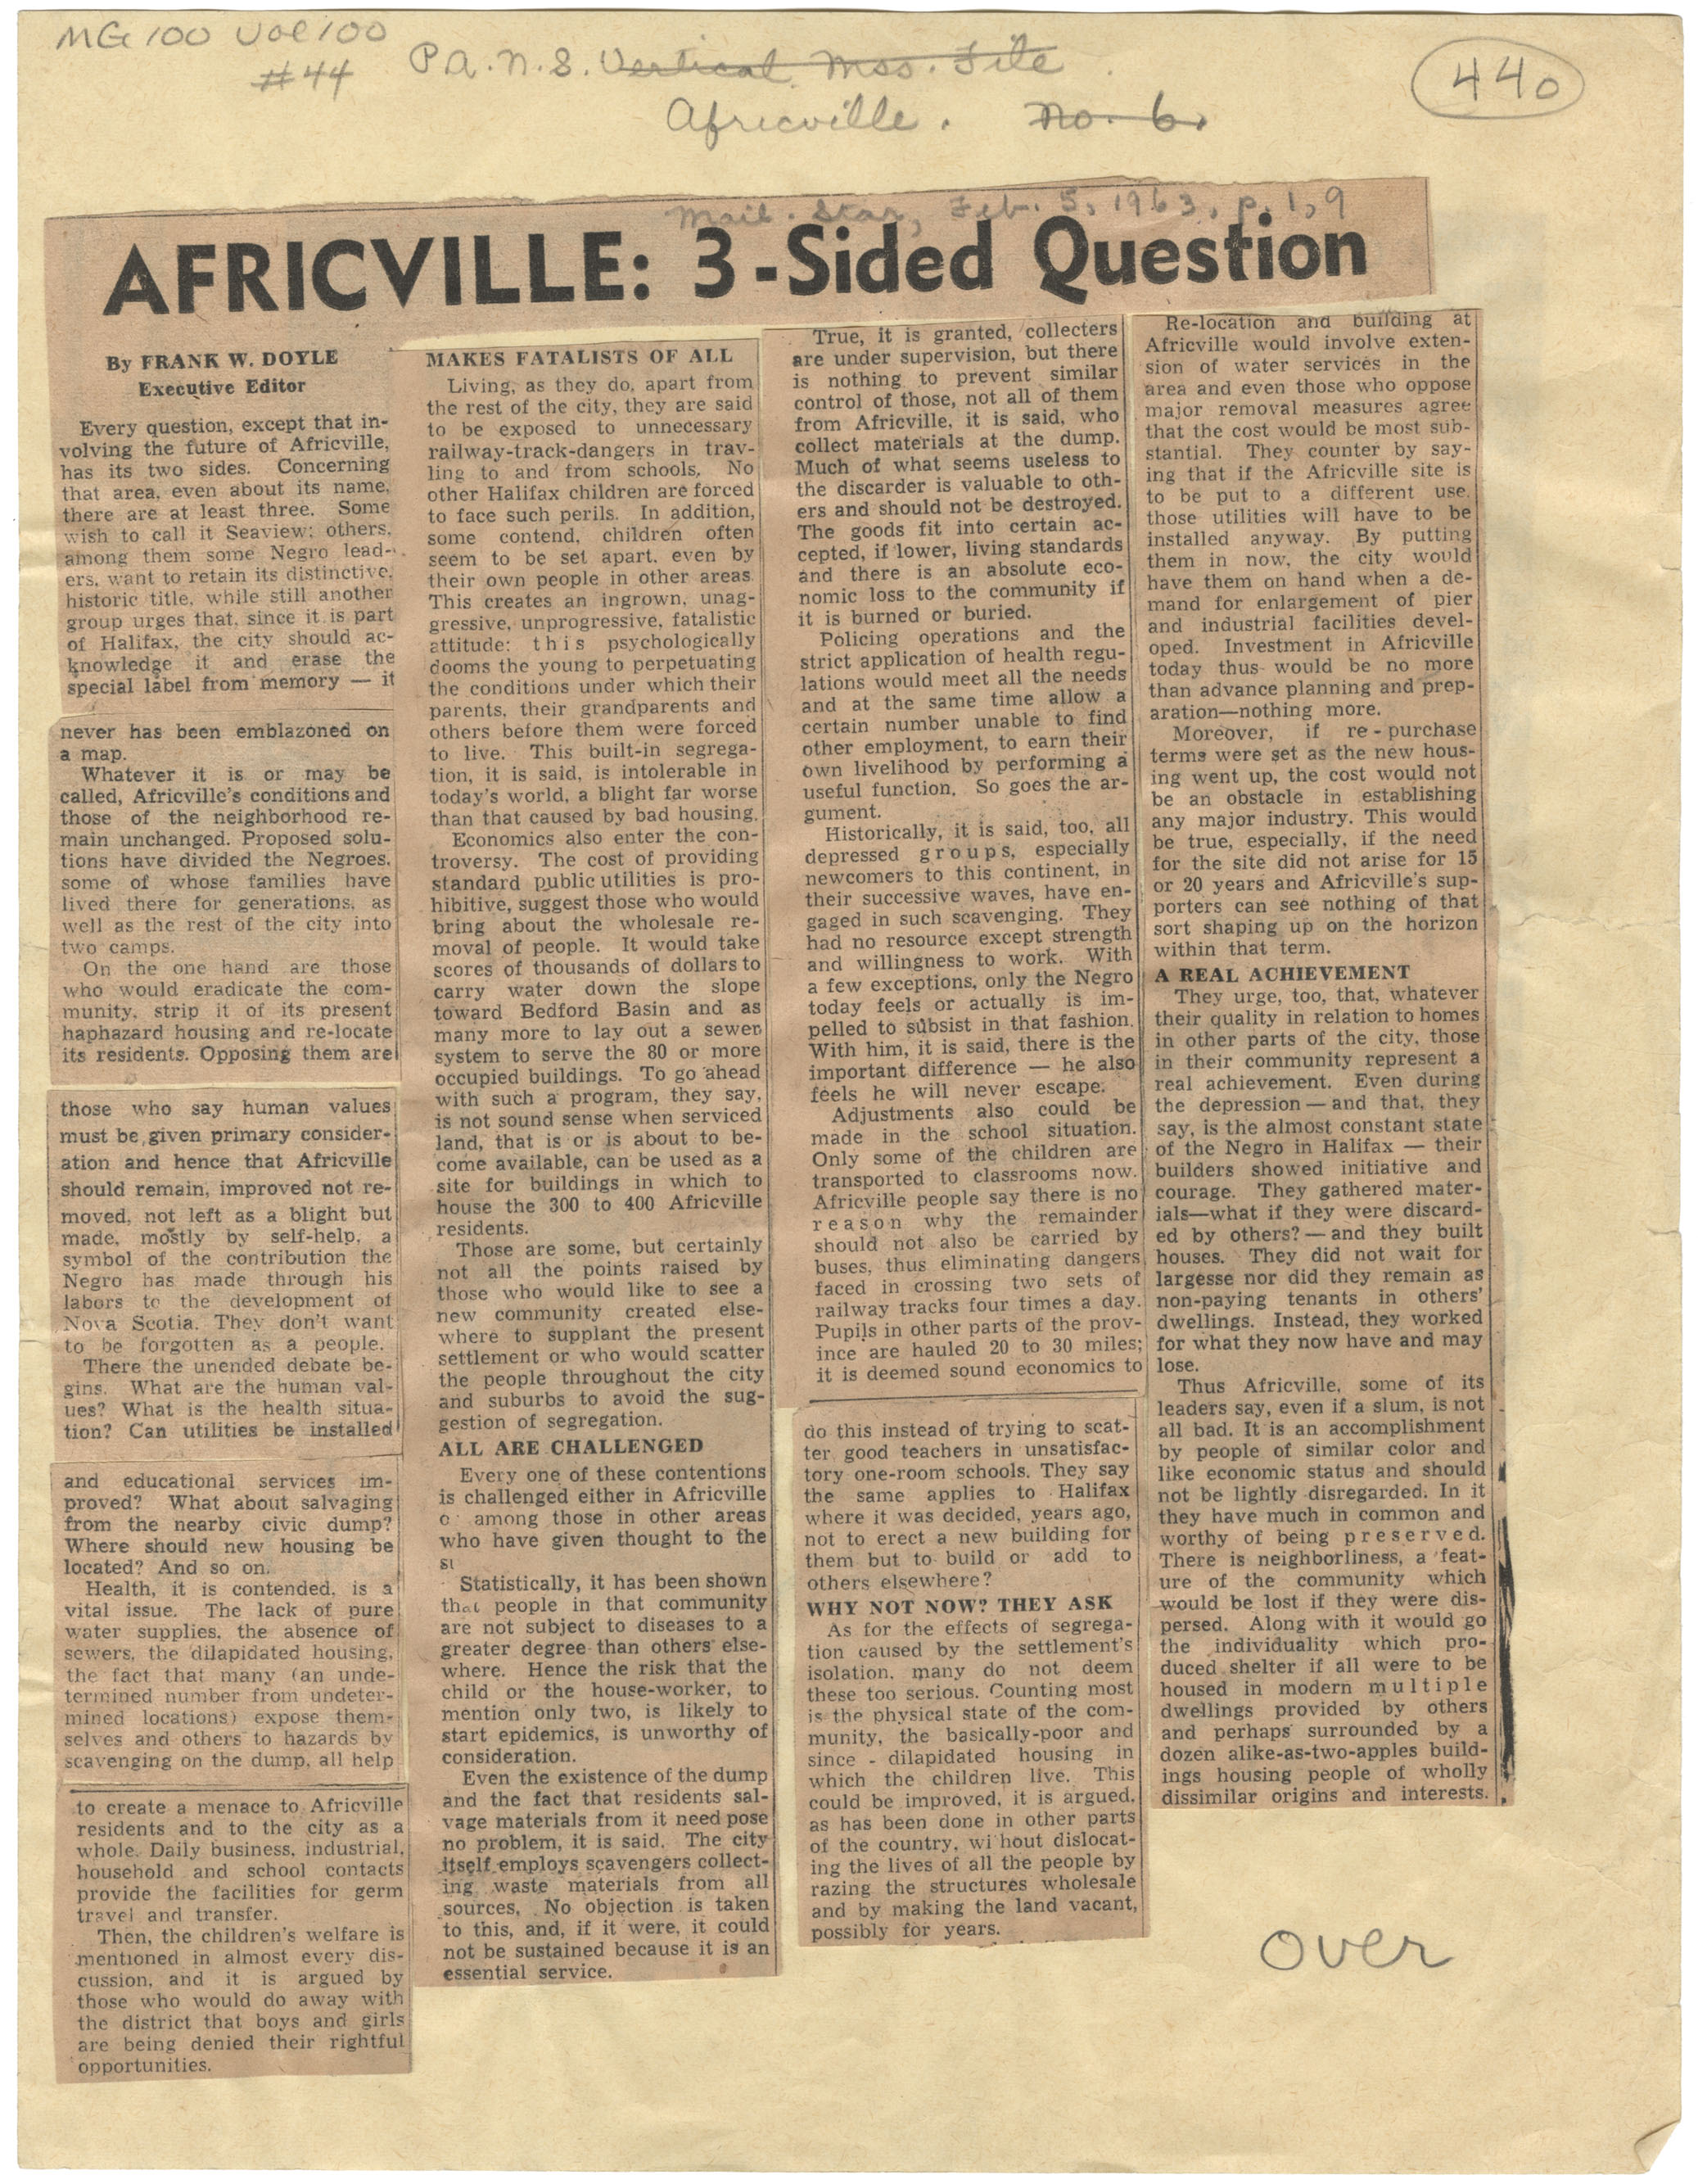 african-heritage : Africville: 3-Sided Question, Mail Star excerpt